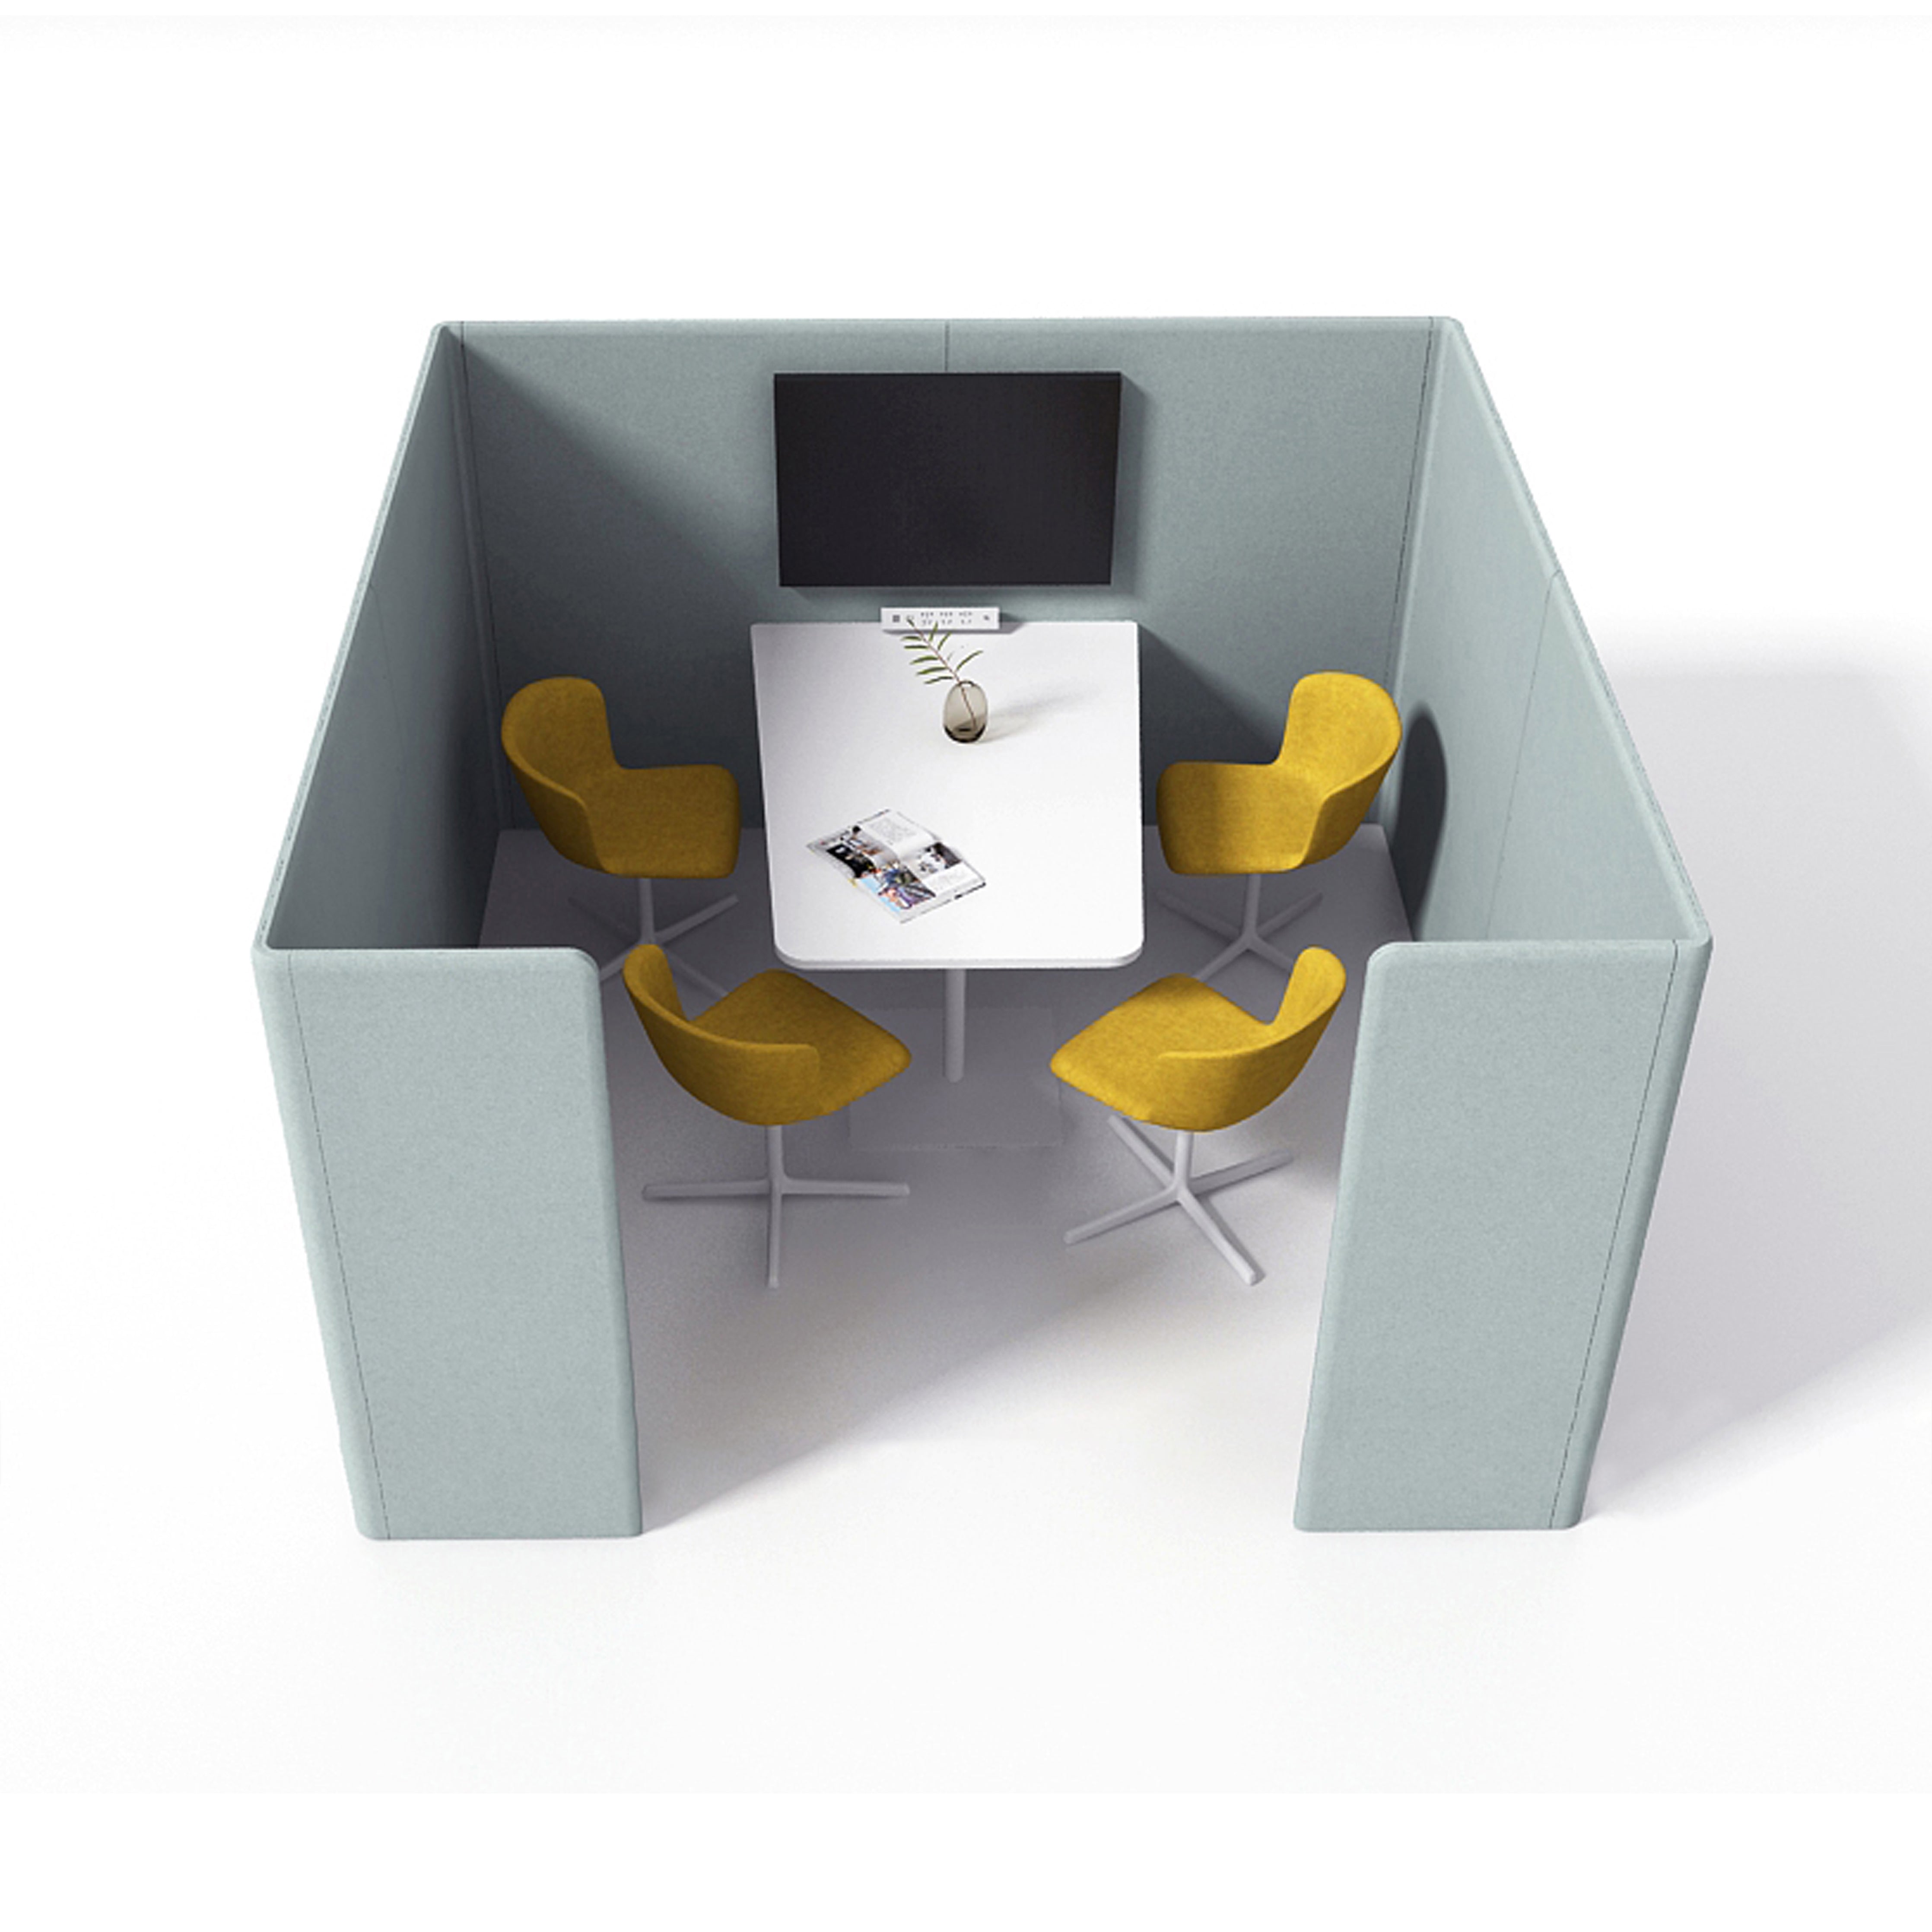 Bequiet I - Privacy Meeting Pod with Table